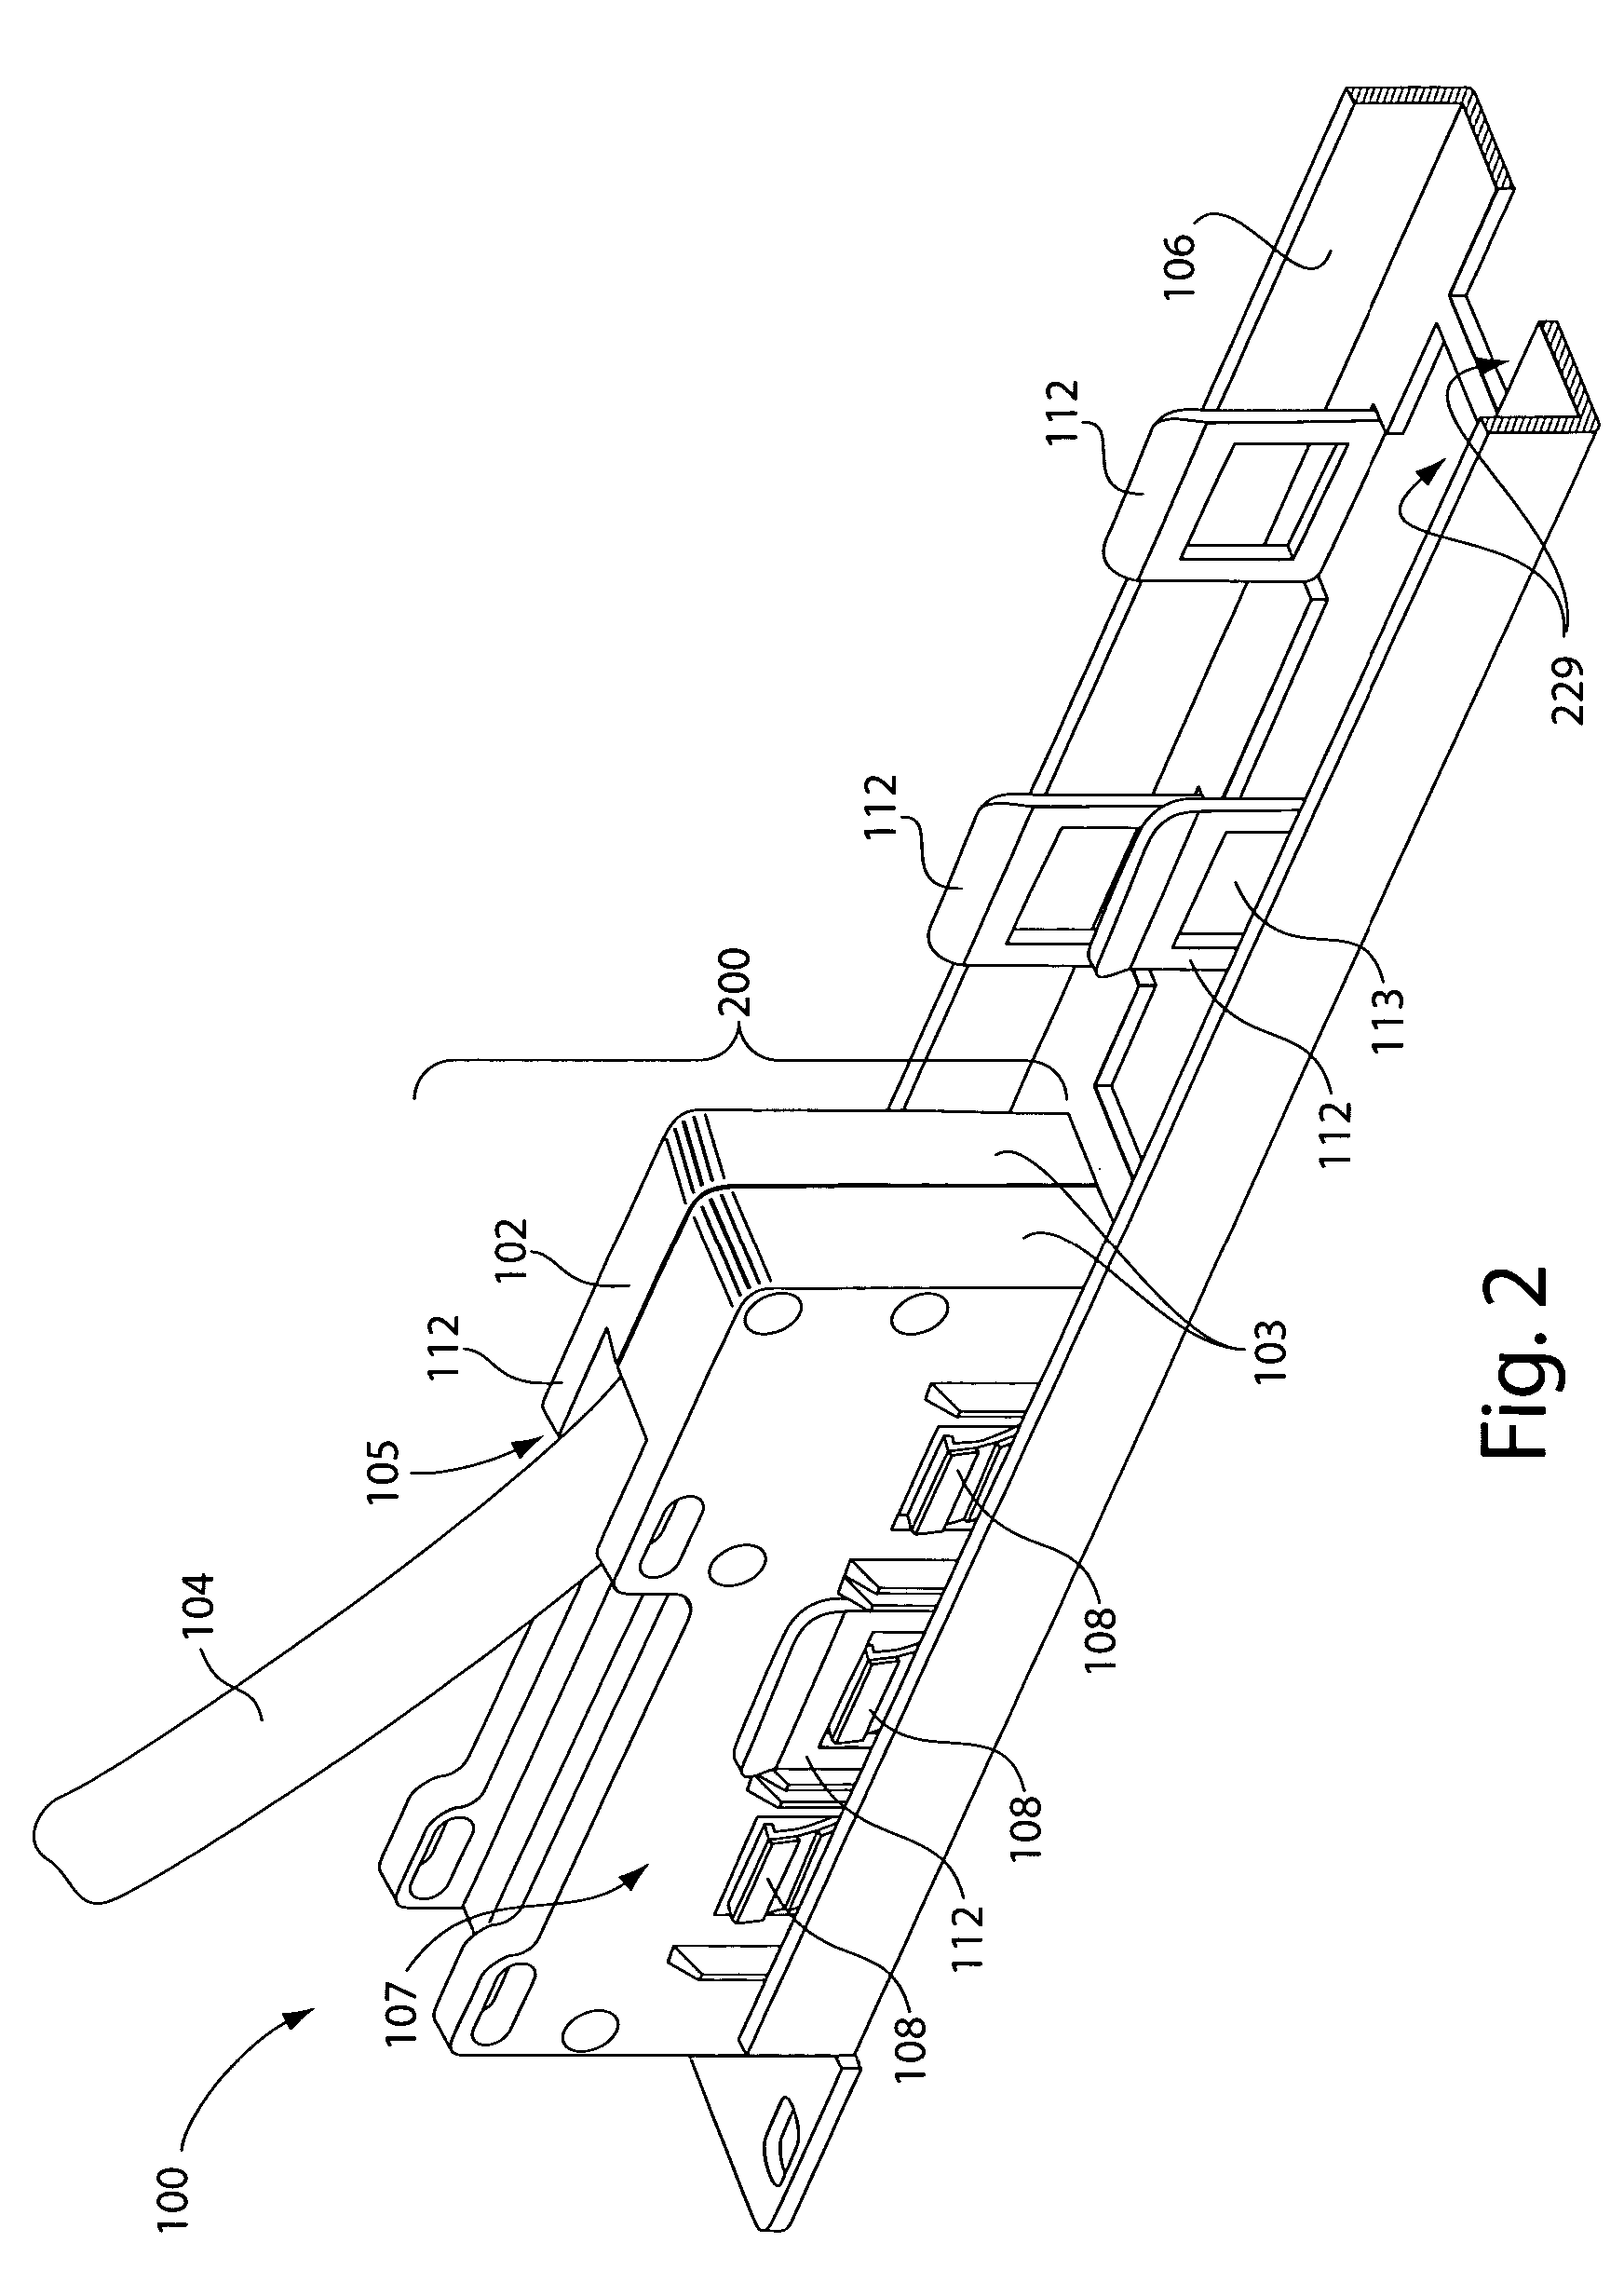 Multiport cabling system and method